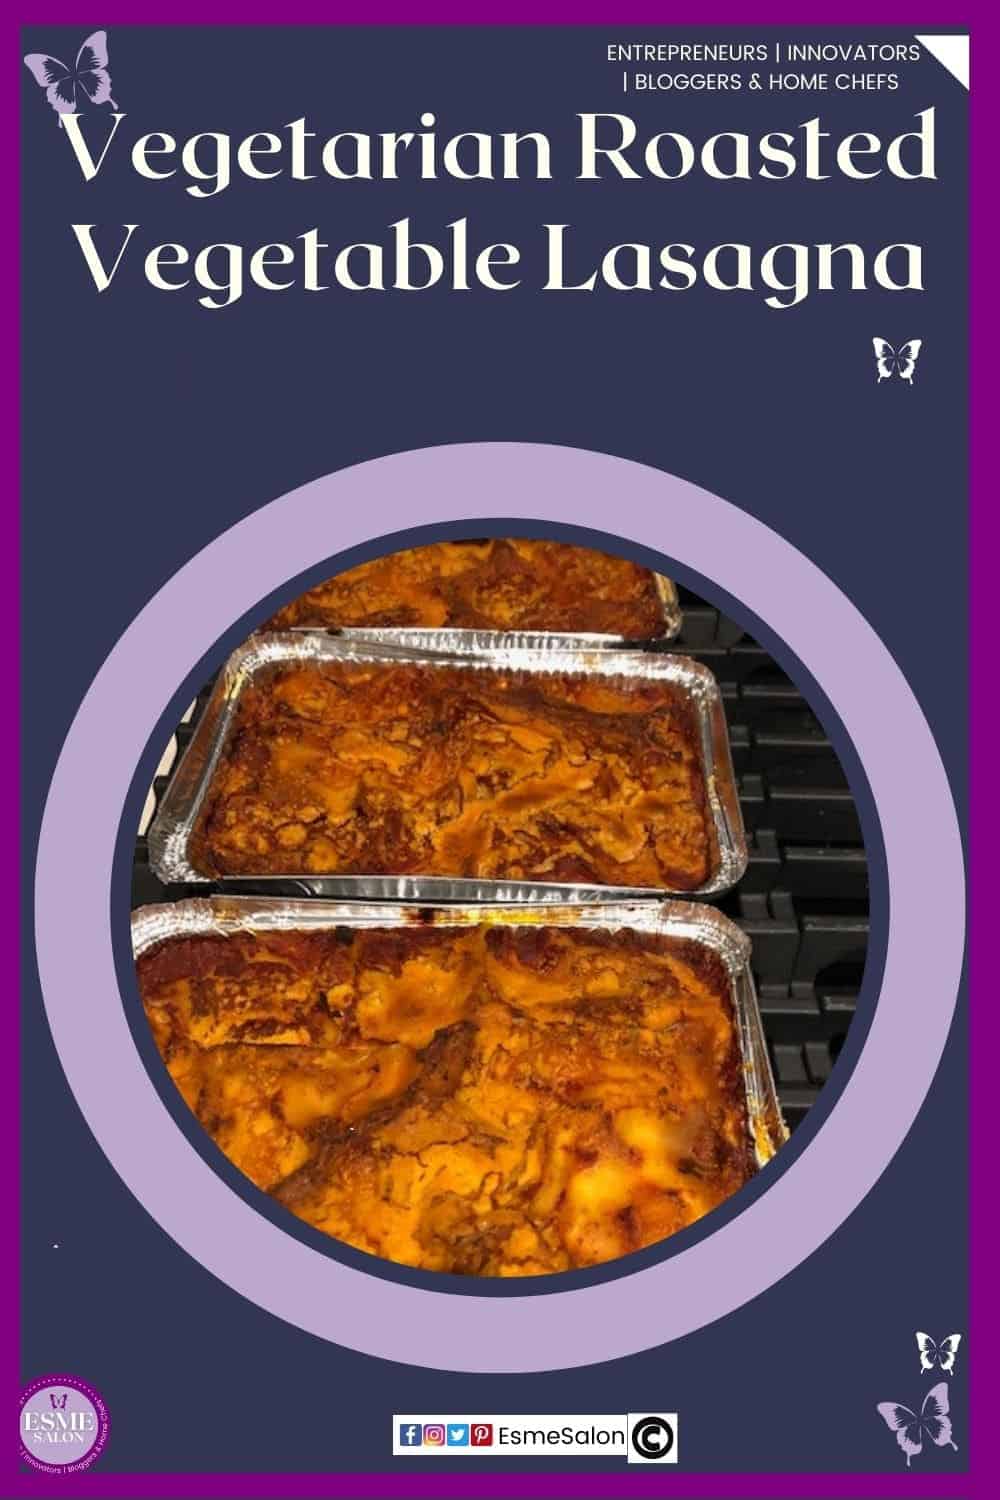 an image of 3 large foil trays filled with Vegetarian Roasted Vegetable Lasagna